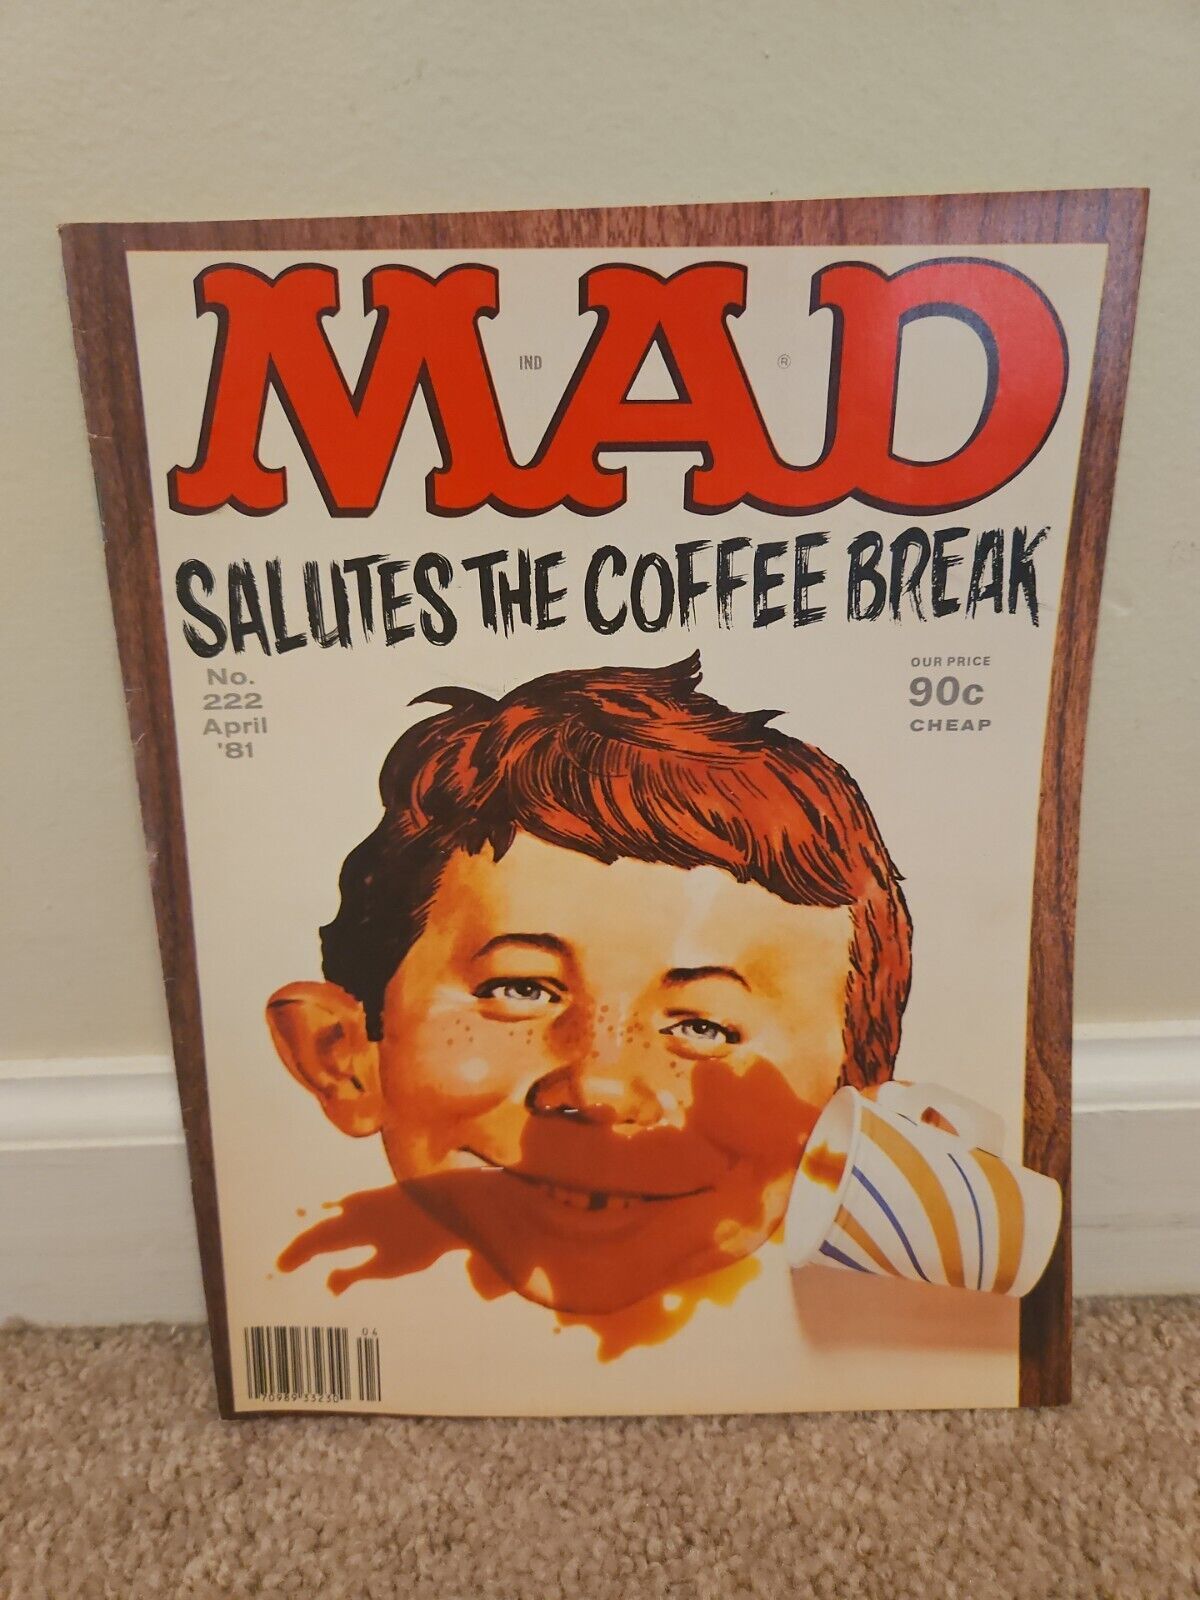 Primary image for Mad Magazine "Salutes the Coffee Break" No. 222 April 1981 Issue VGood Condition